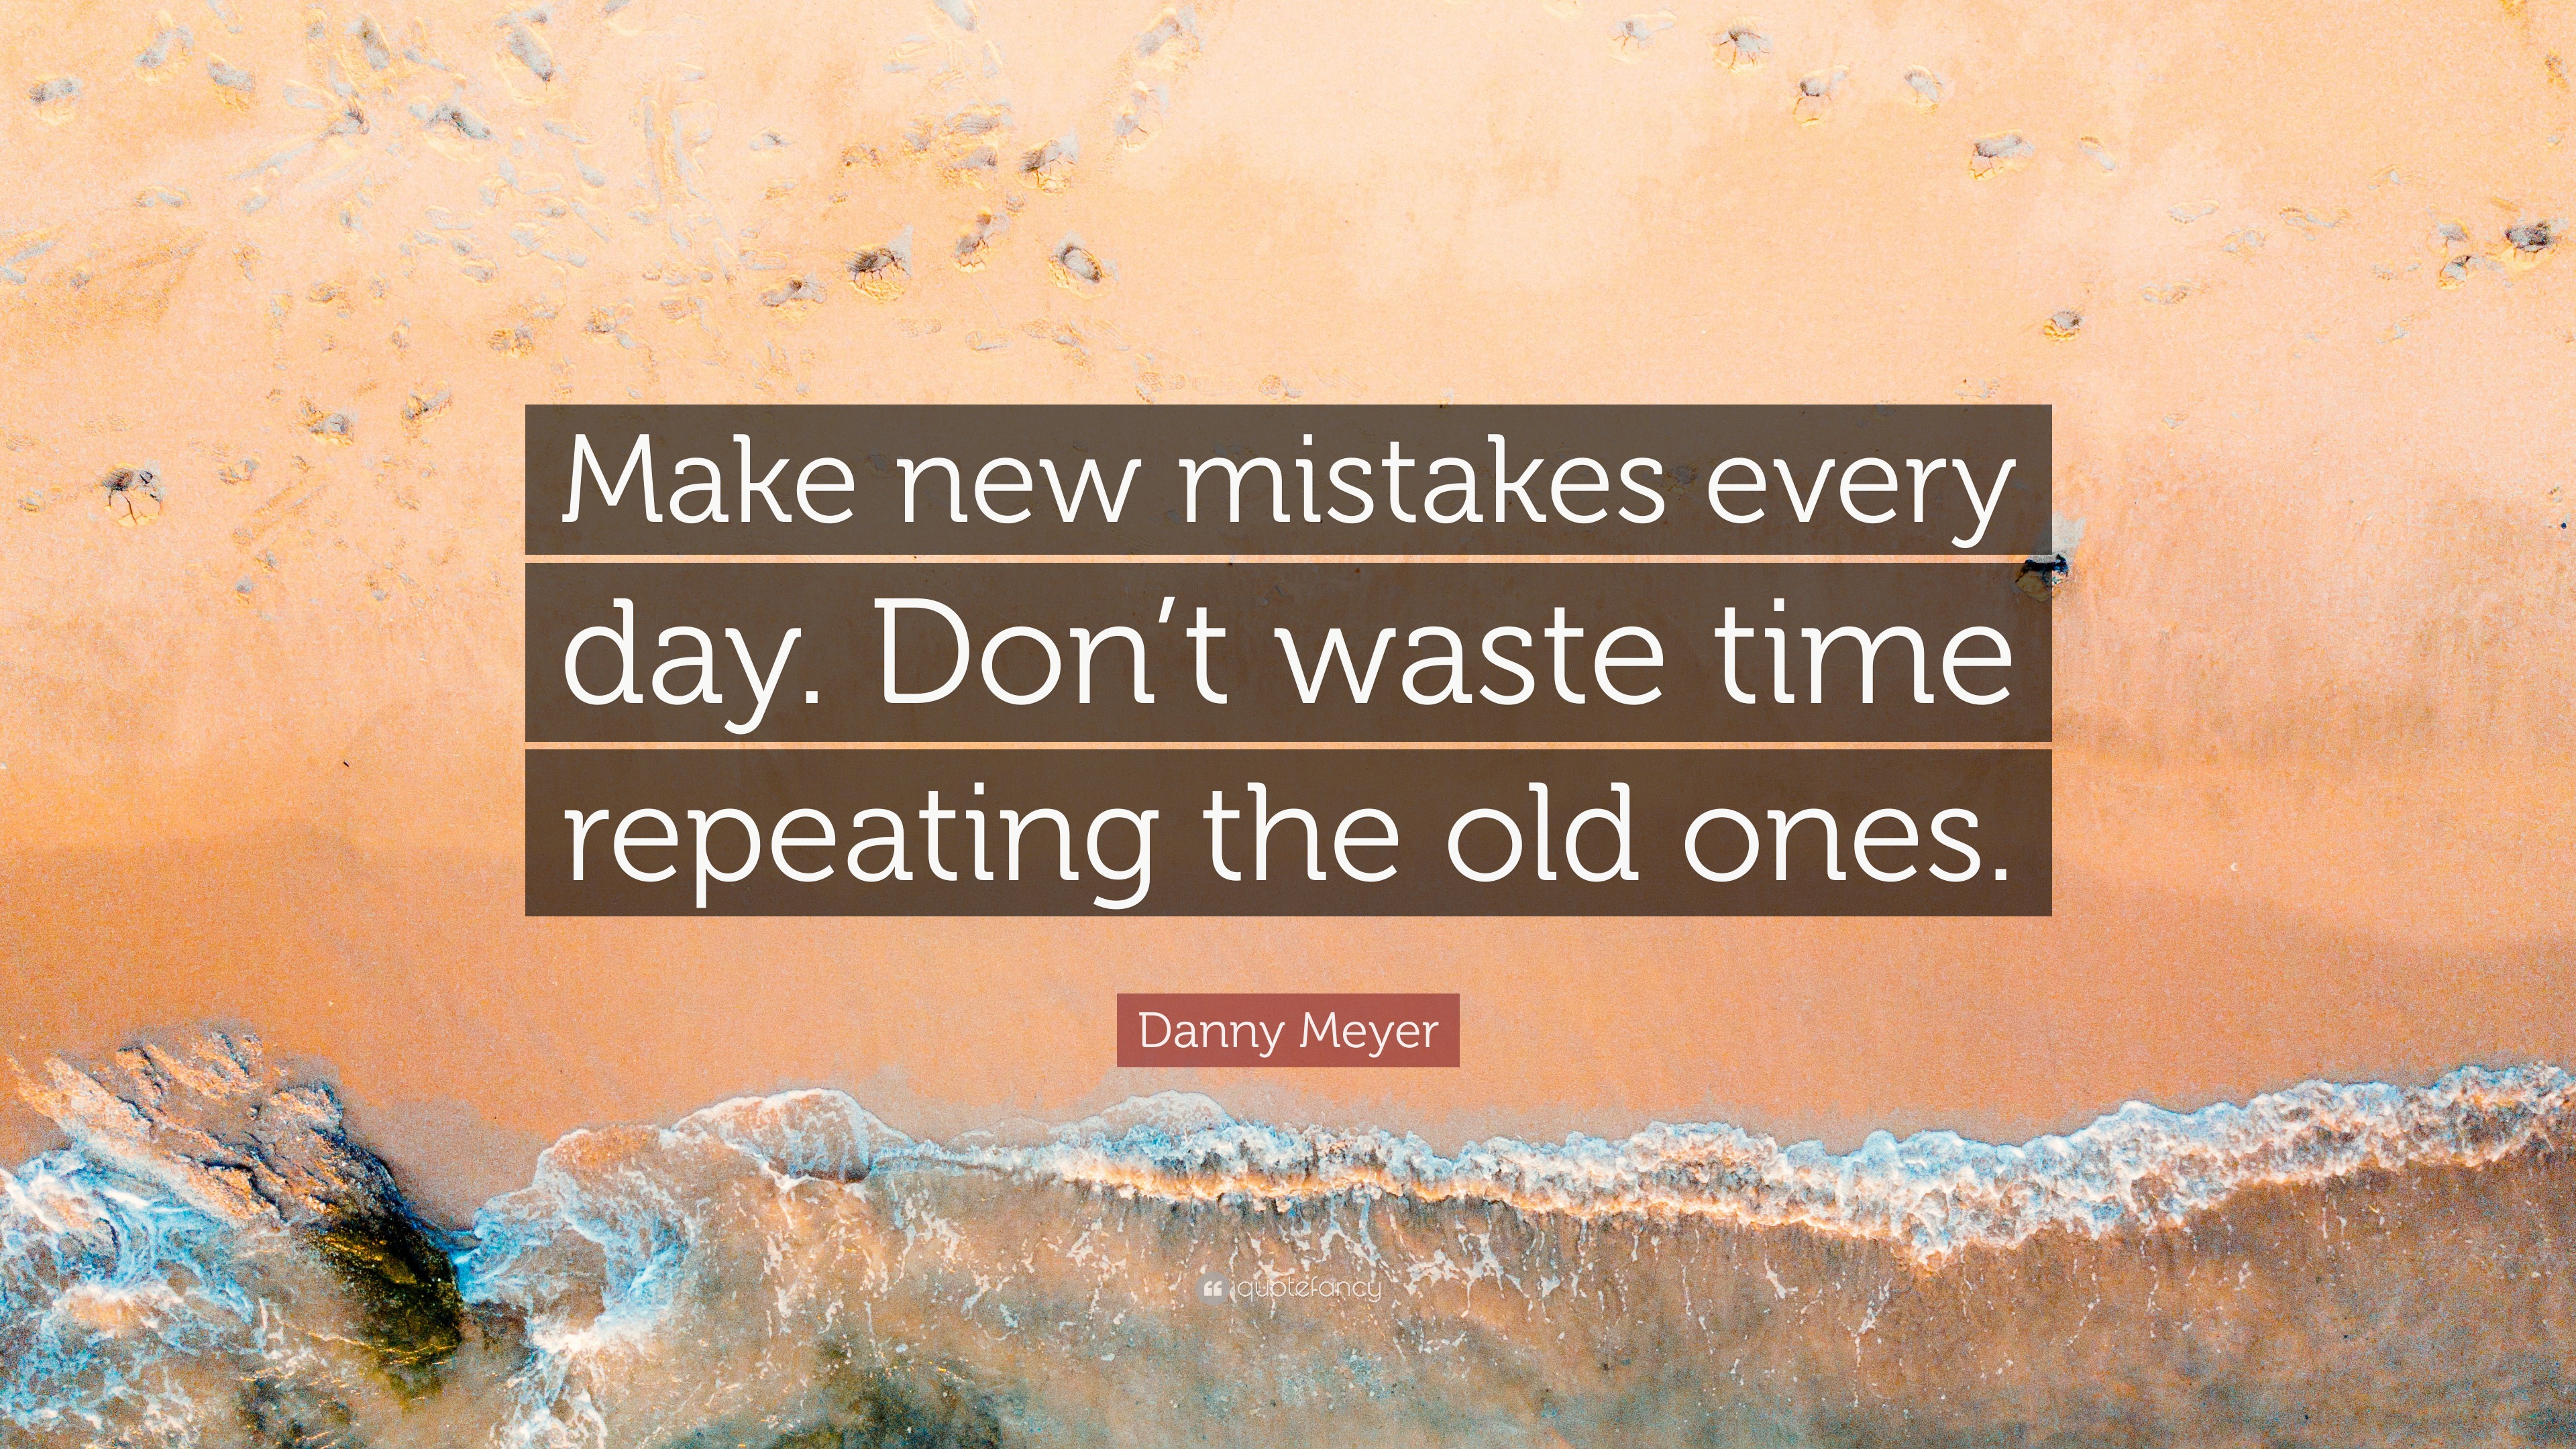 My Daily Vibe: Mistakes Are Part of Life